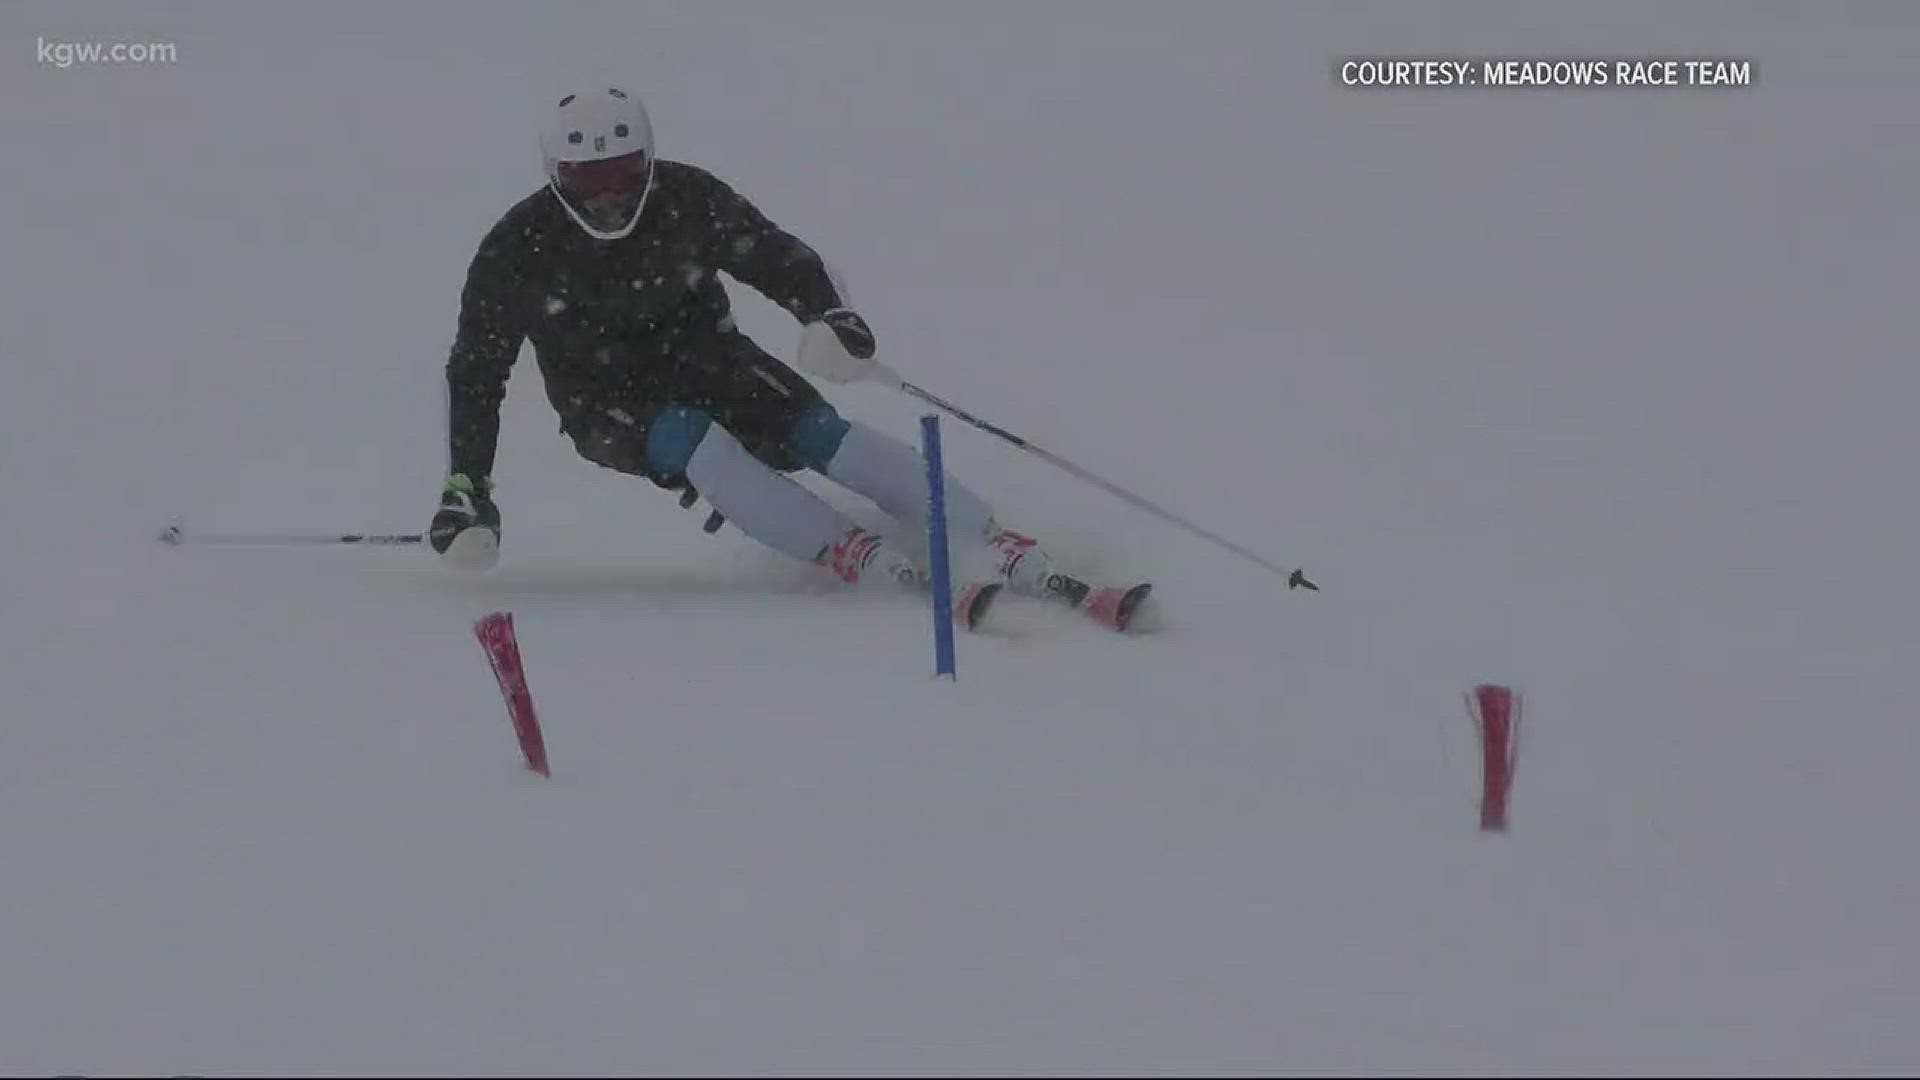 Lincoln High senior Asa Miller is ready to ski for the Philippines in the Olympics.